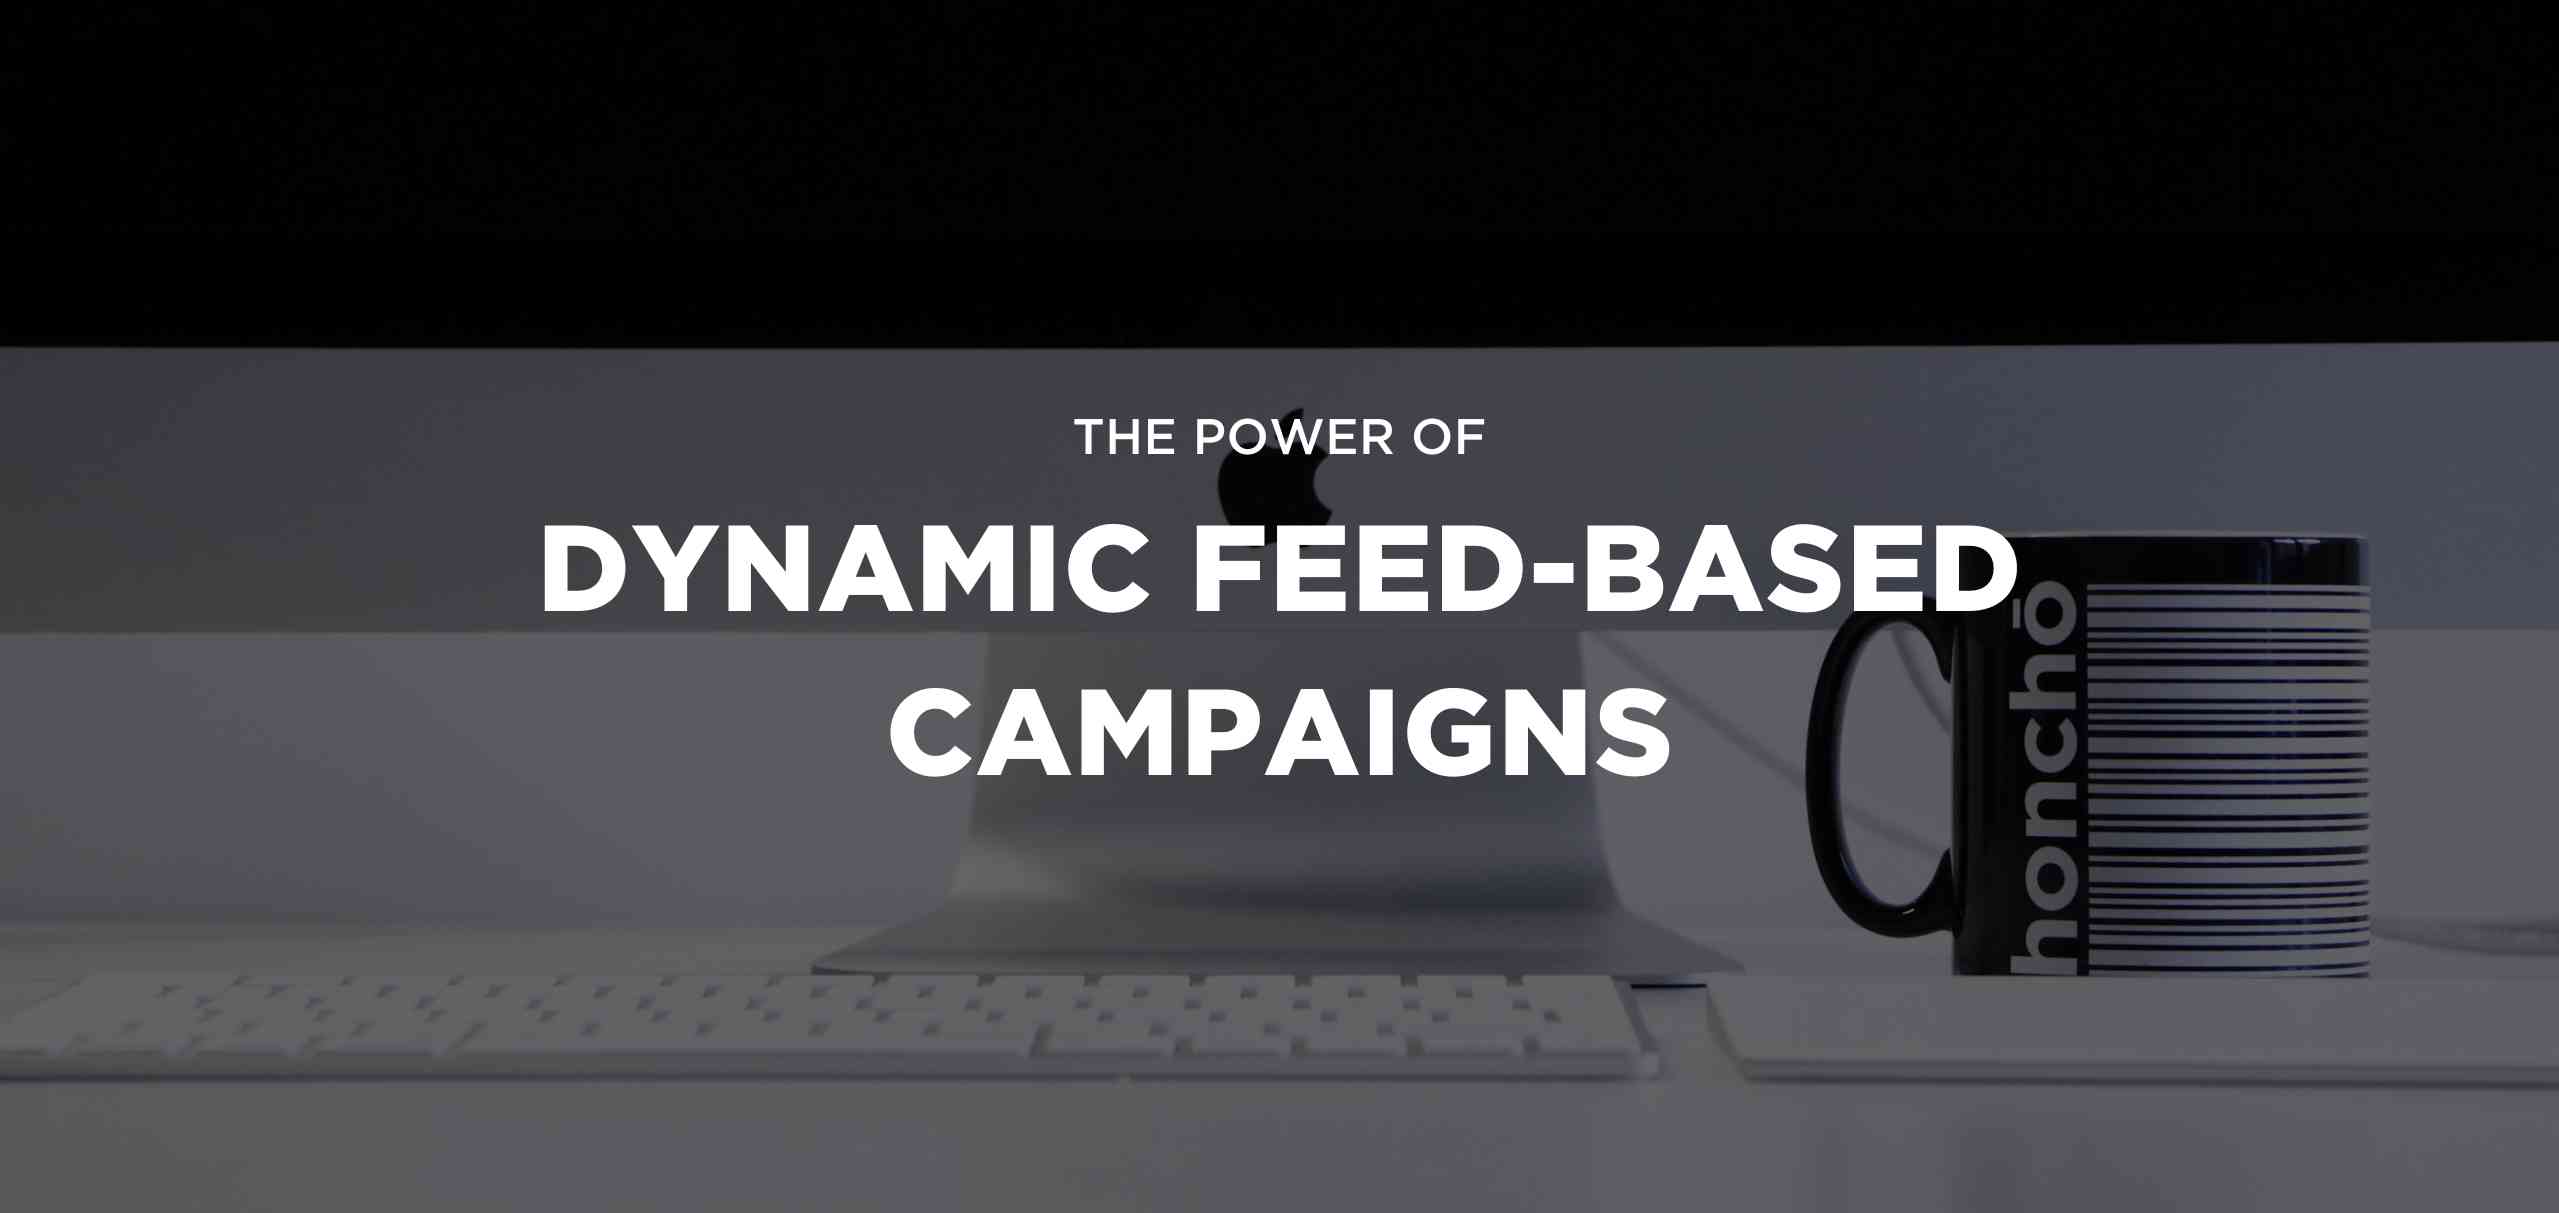 Dynamic feed-based campaigns